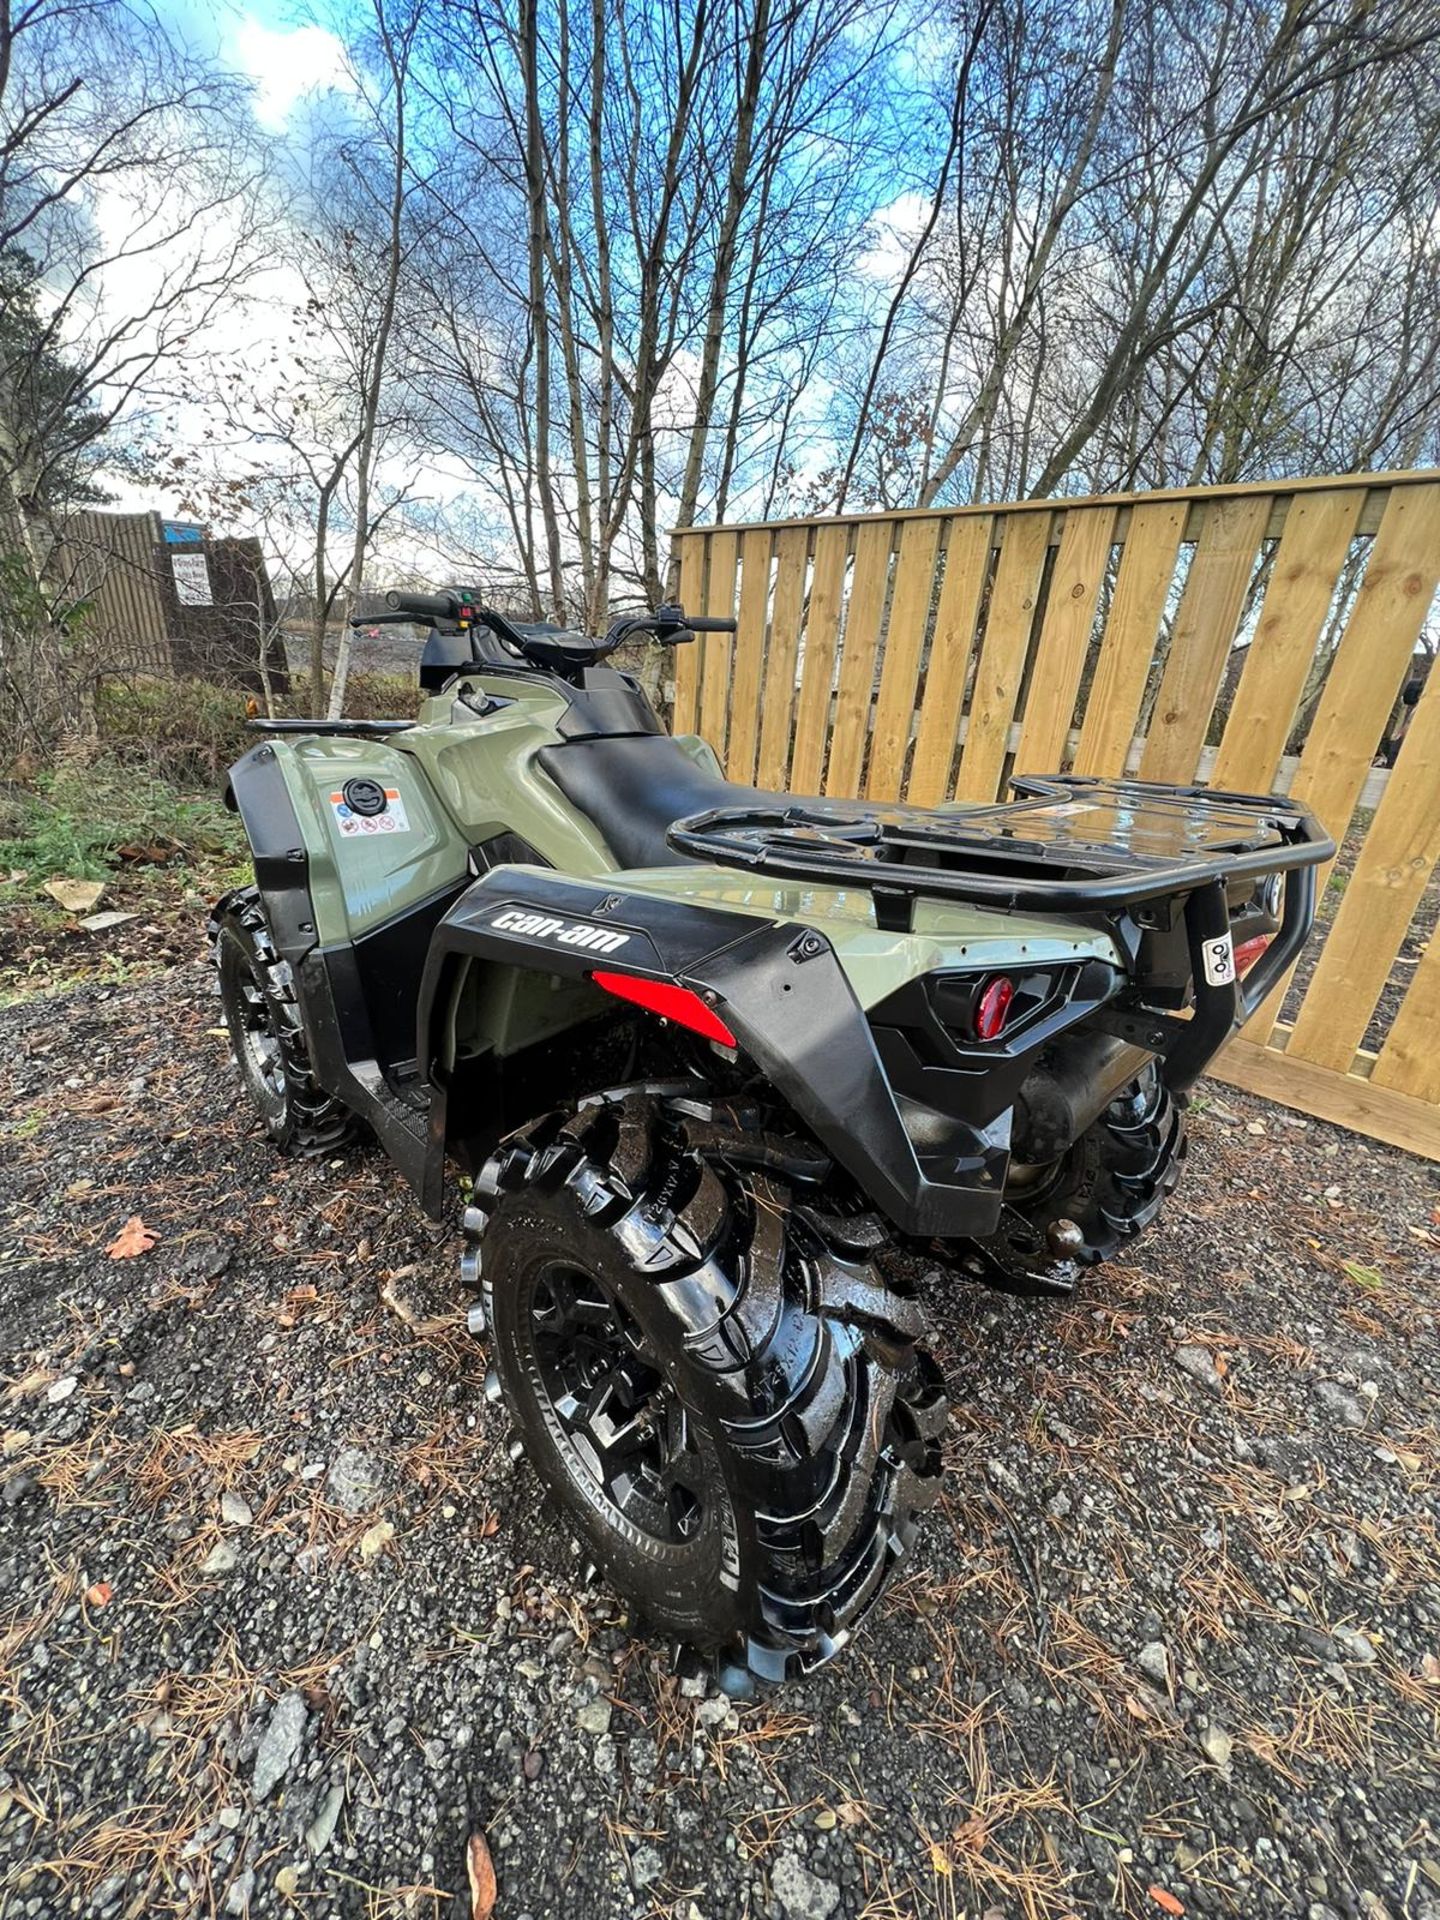 4X4 CAN AM OUTLANDER PRO 570 ROAD LEGAL - Image 15 of 15